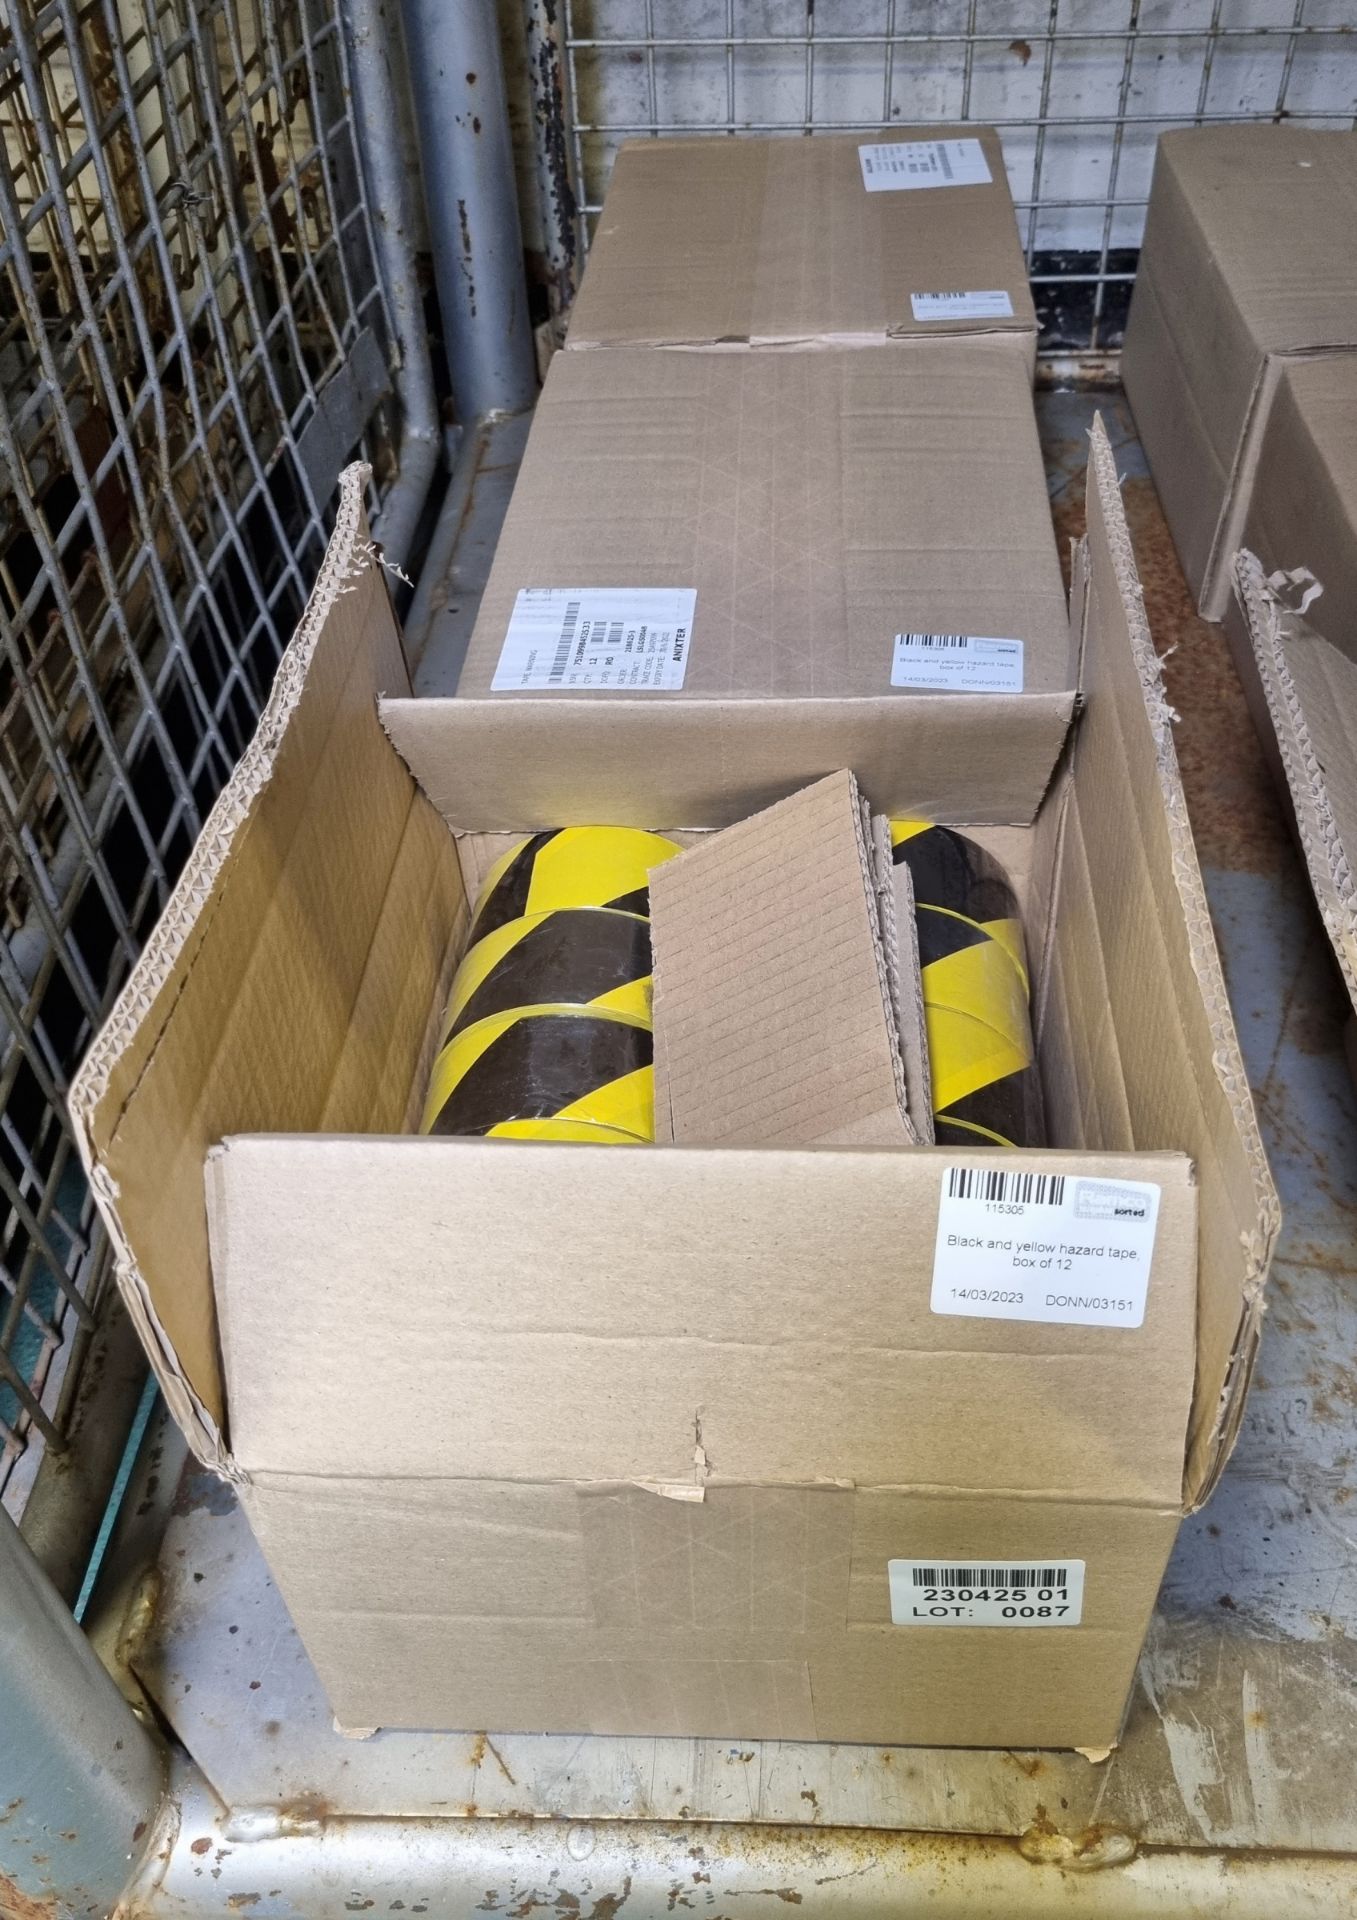 3x boxes of Black and yellow hazard tape - 12 rolls per box